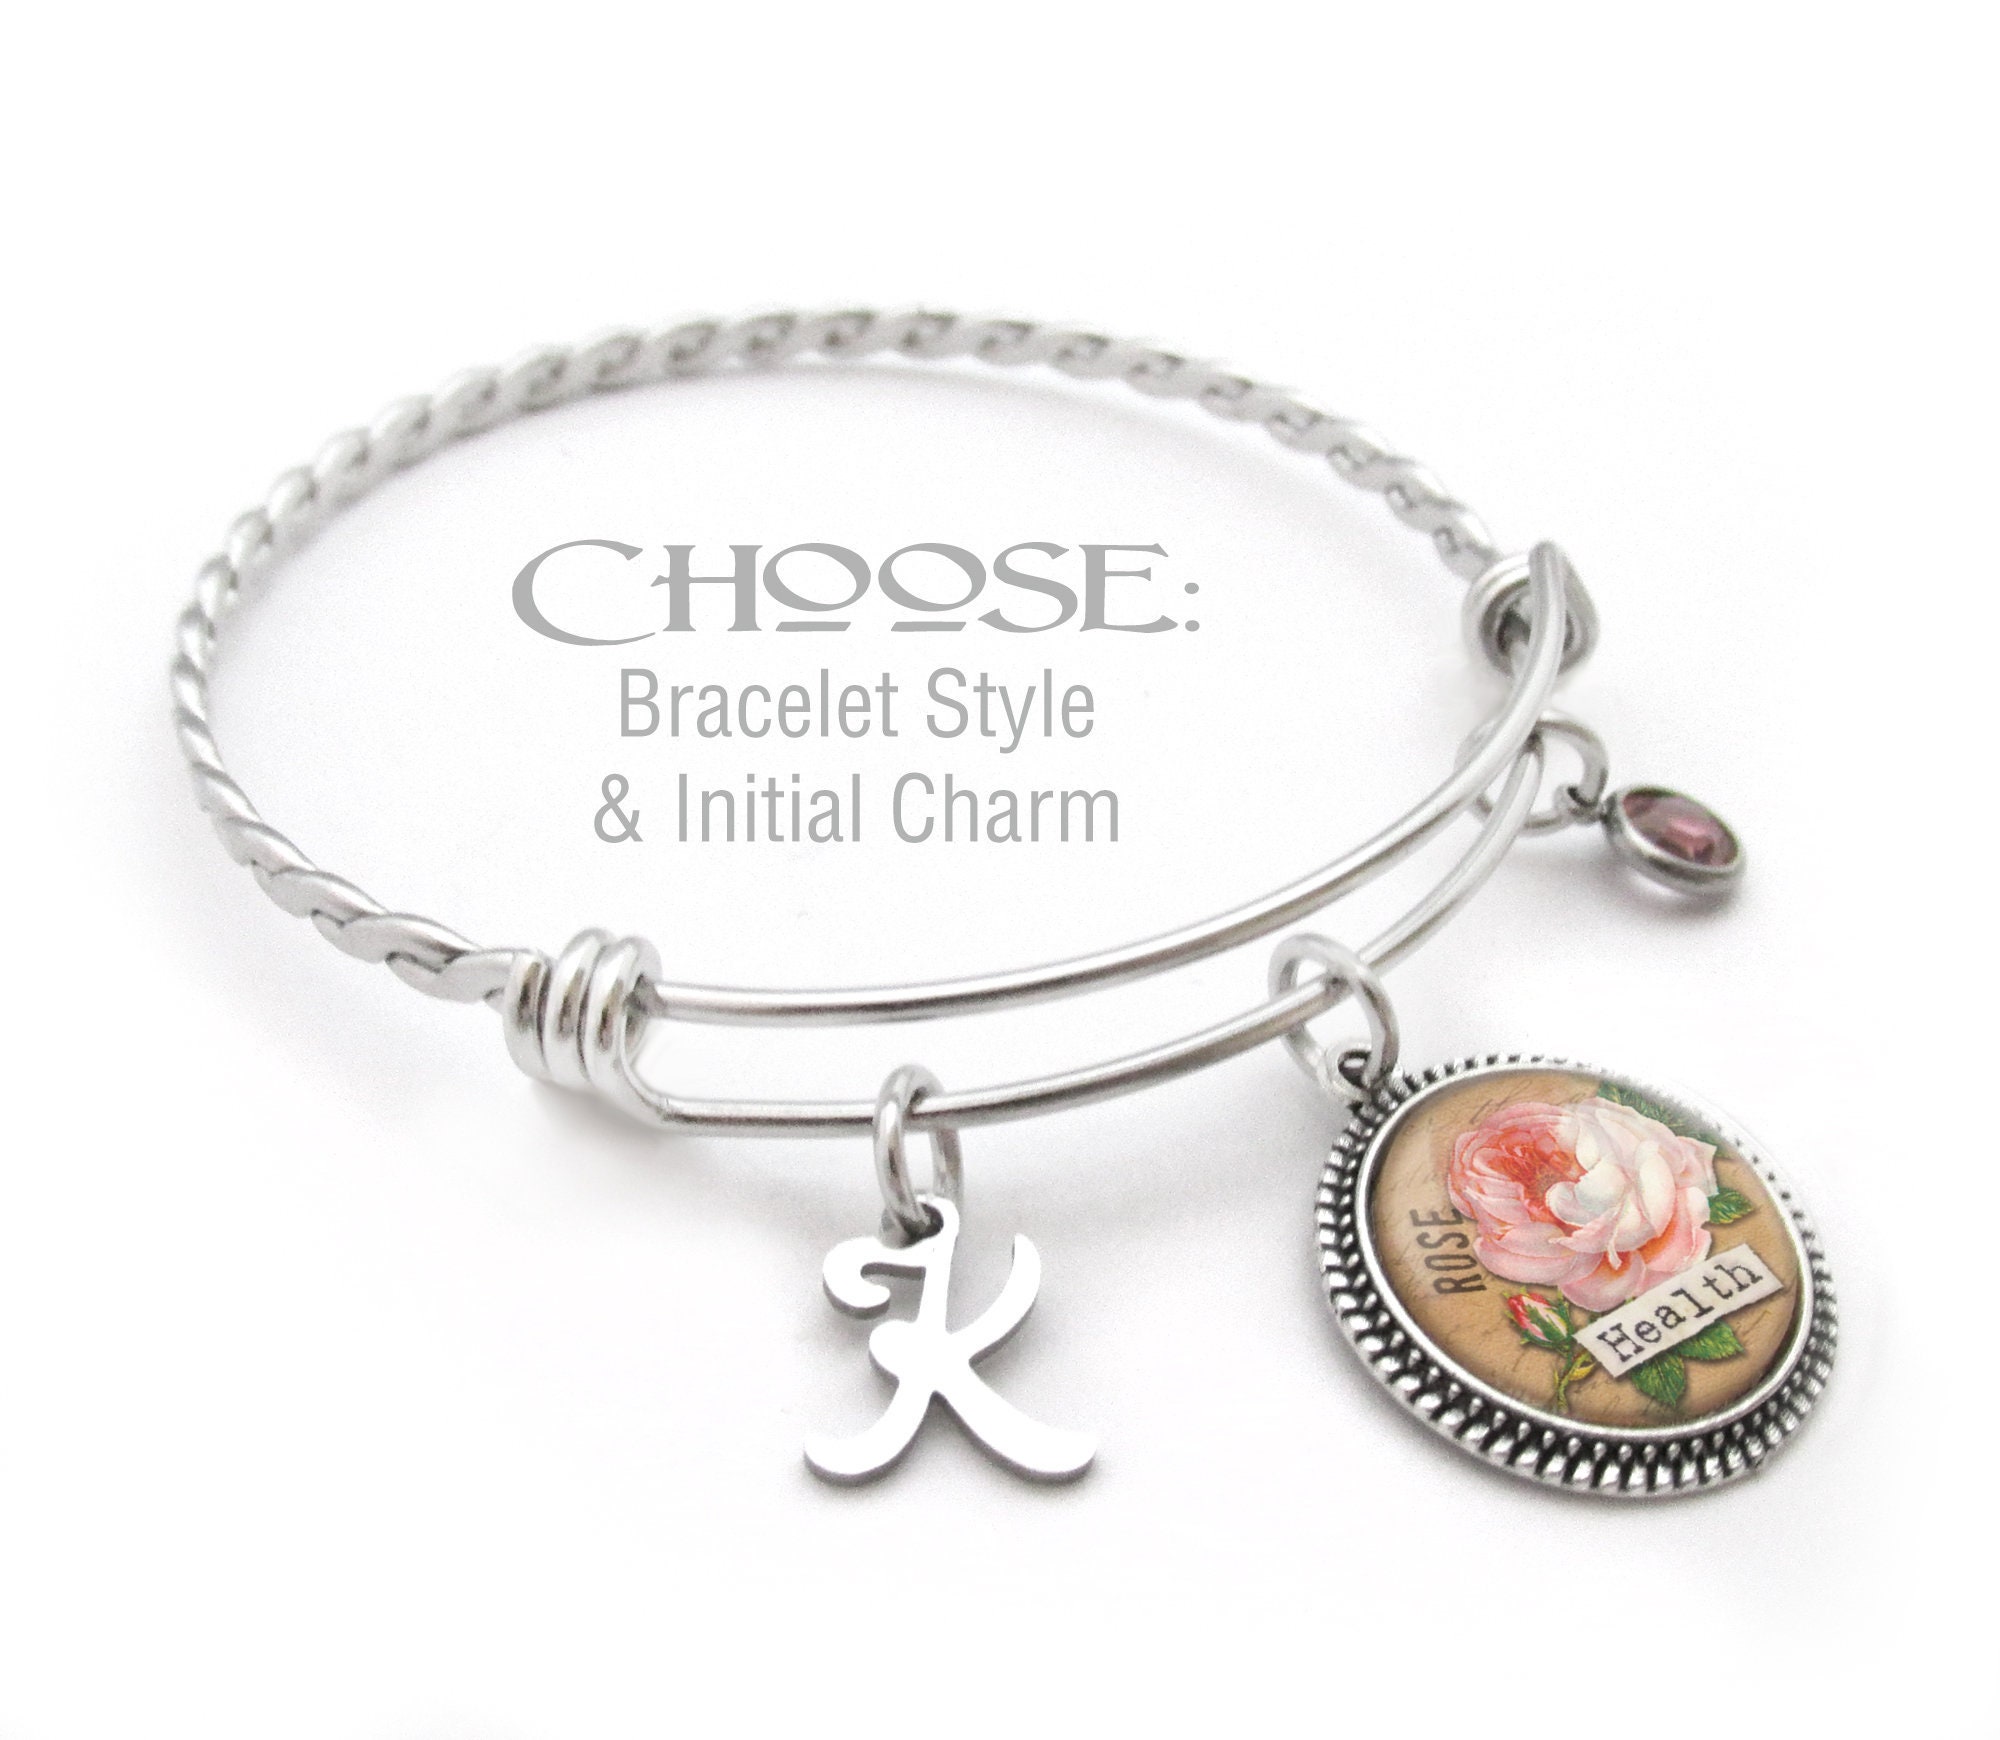 Custom Charm Bracelet, Design Your Own, Choose Your Charms, Birthday Bracelet, Stackable Bangles, Personalized Gifts, Gifts for Her